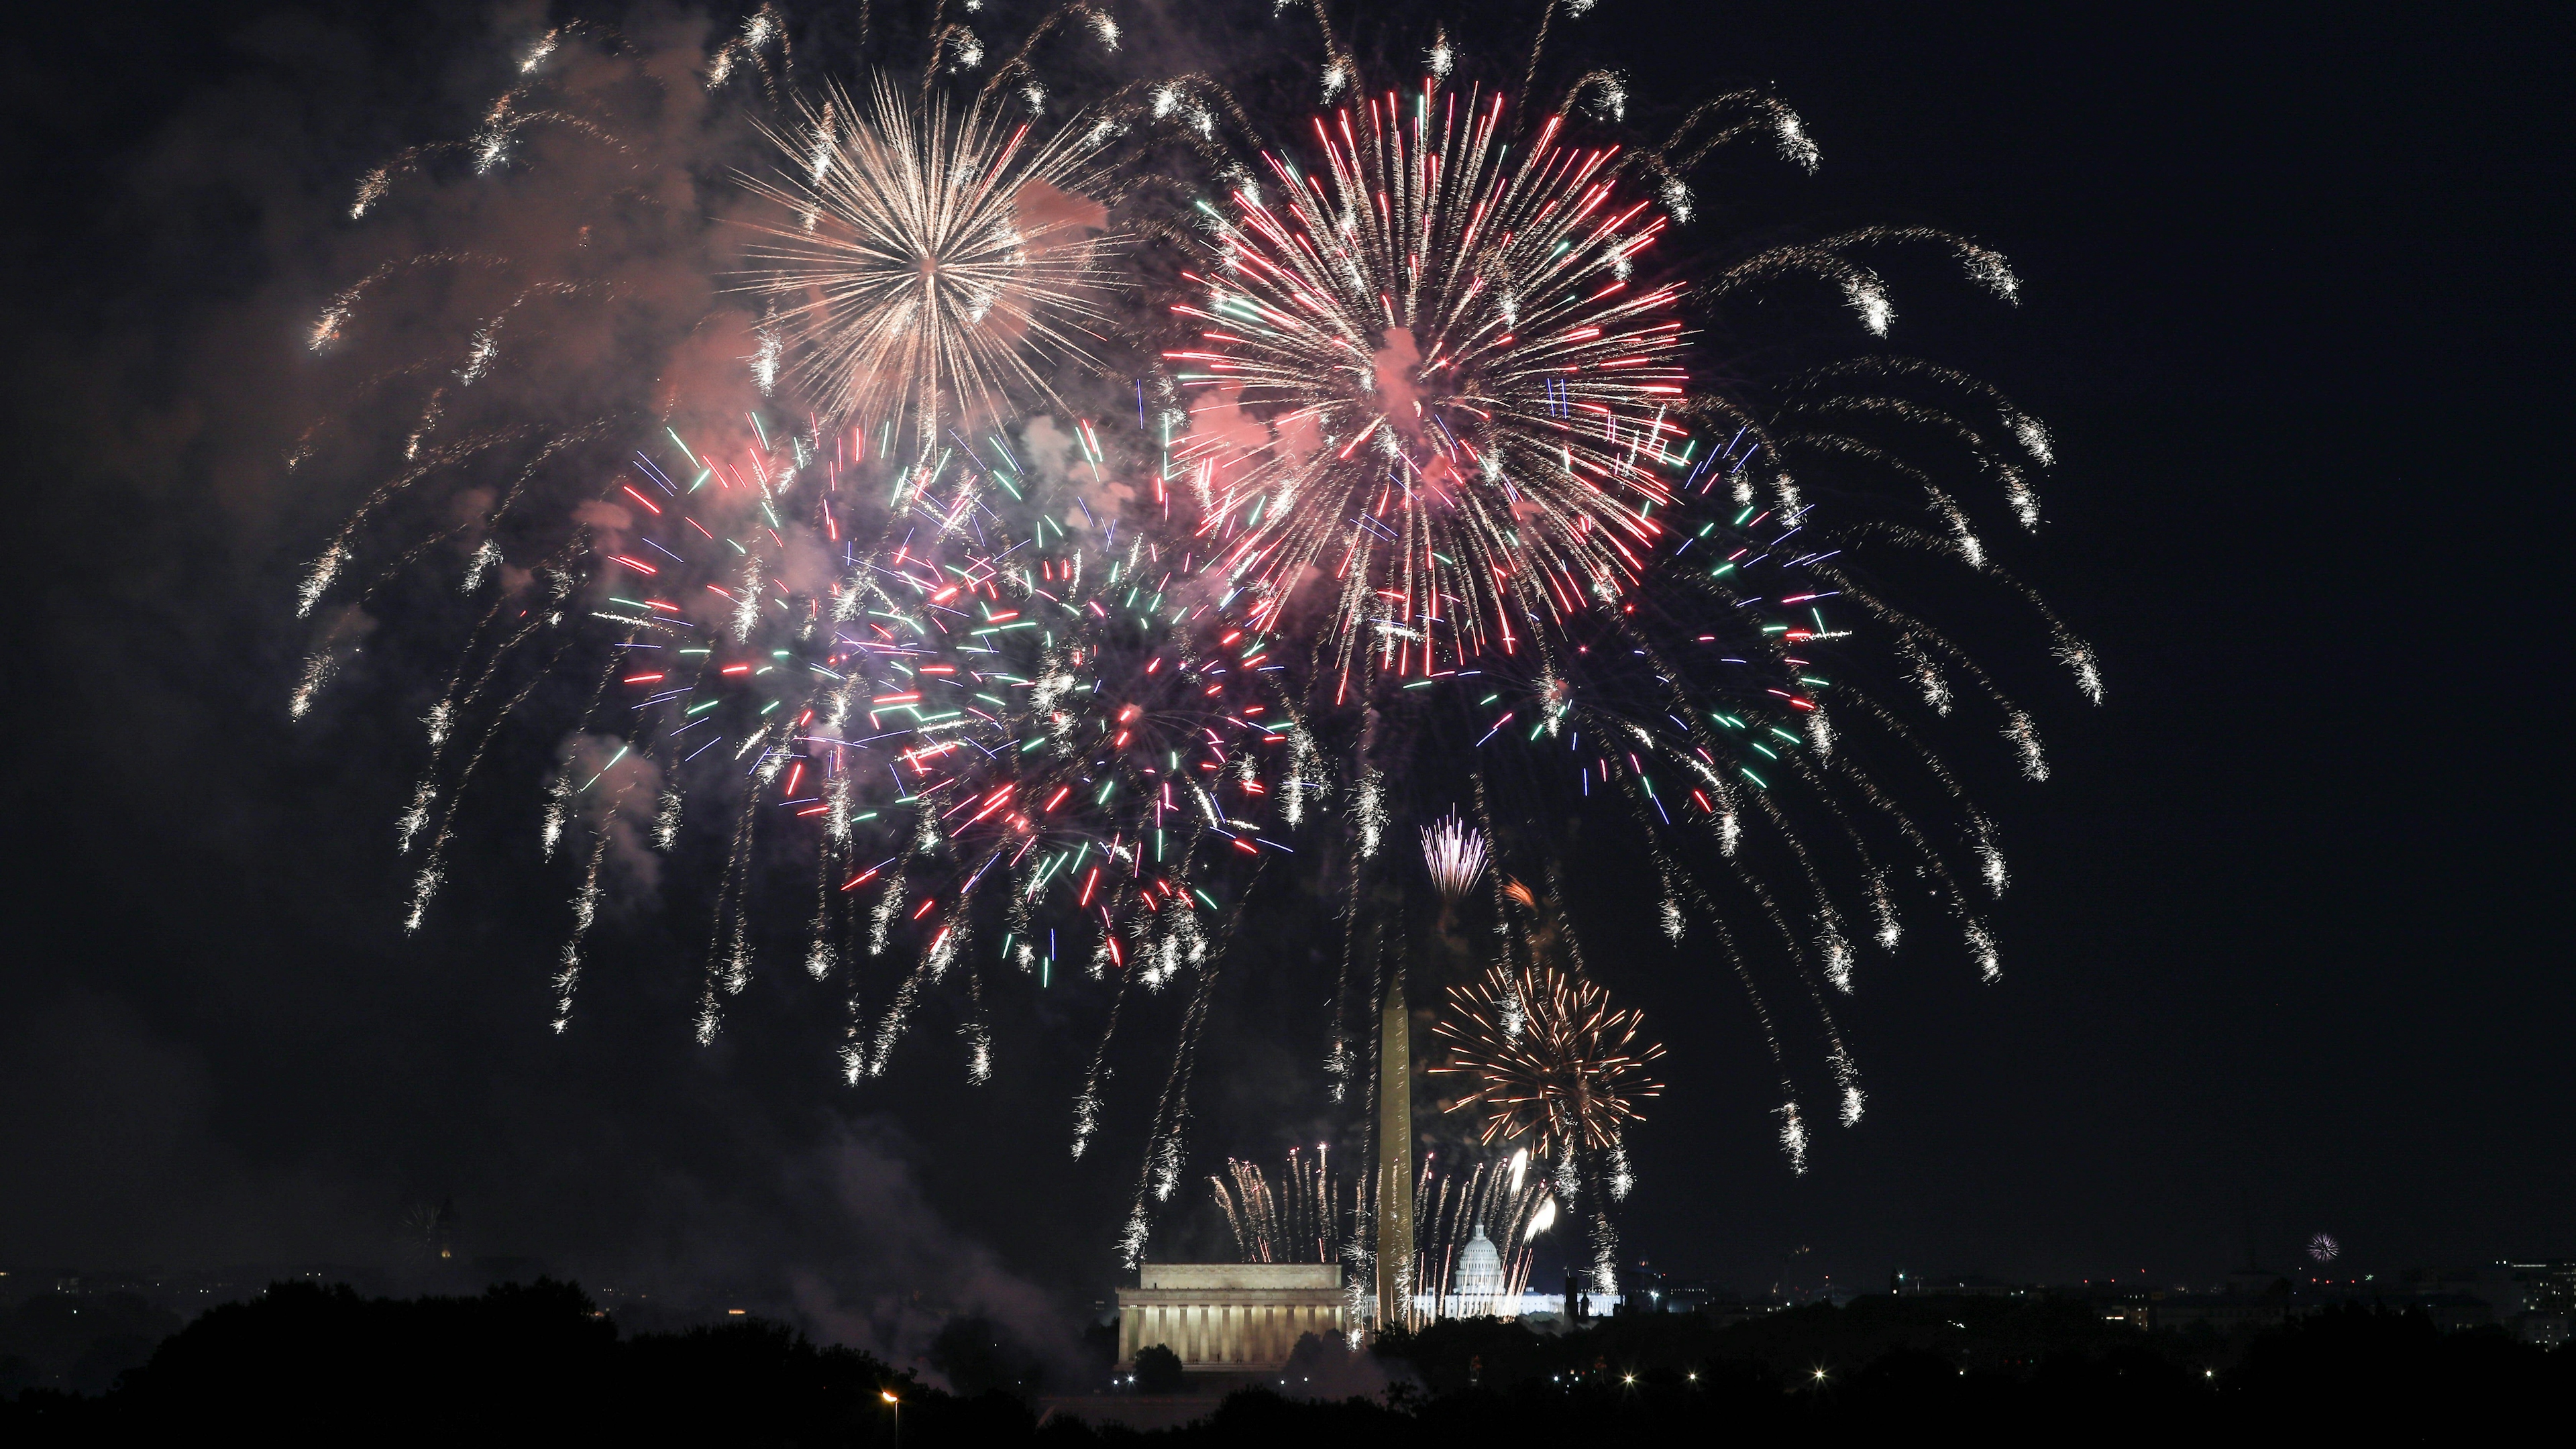 Fireworks are set off on the National Mall over the Washington Monument, Lincoln Memorial and US Capitol Building as part of celebrations for Independence Day